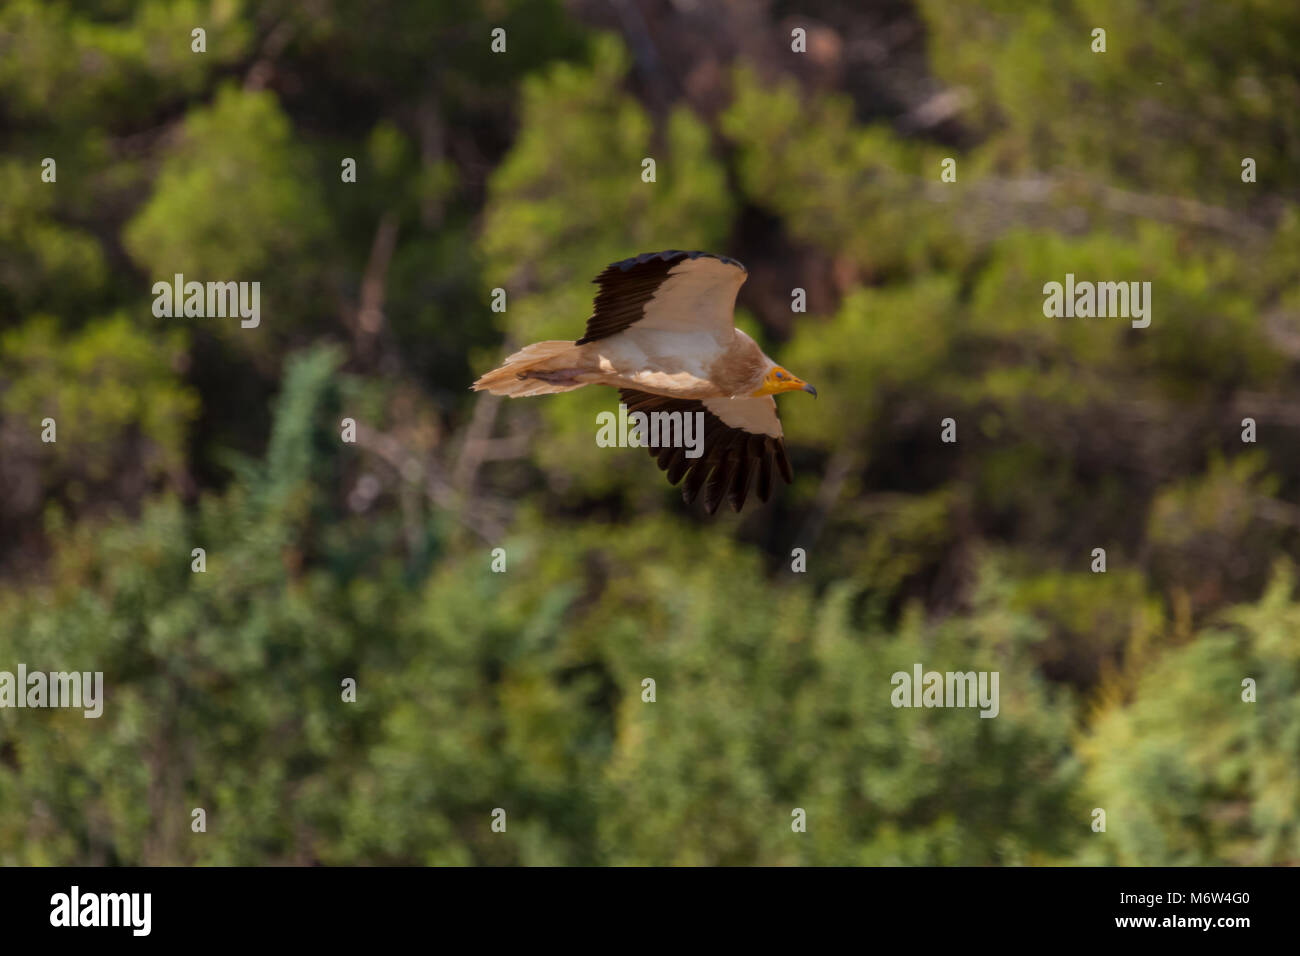 egyptian vulture in flight on a pine tree background Stock Photo